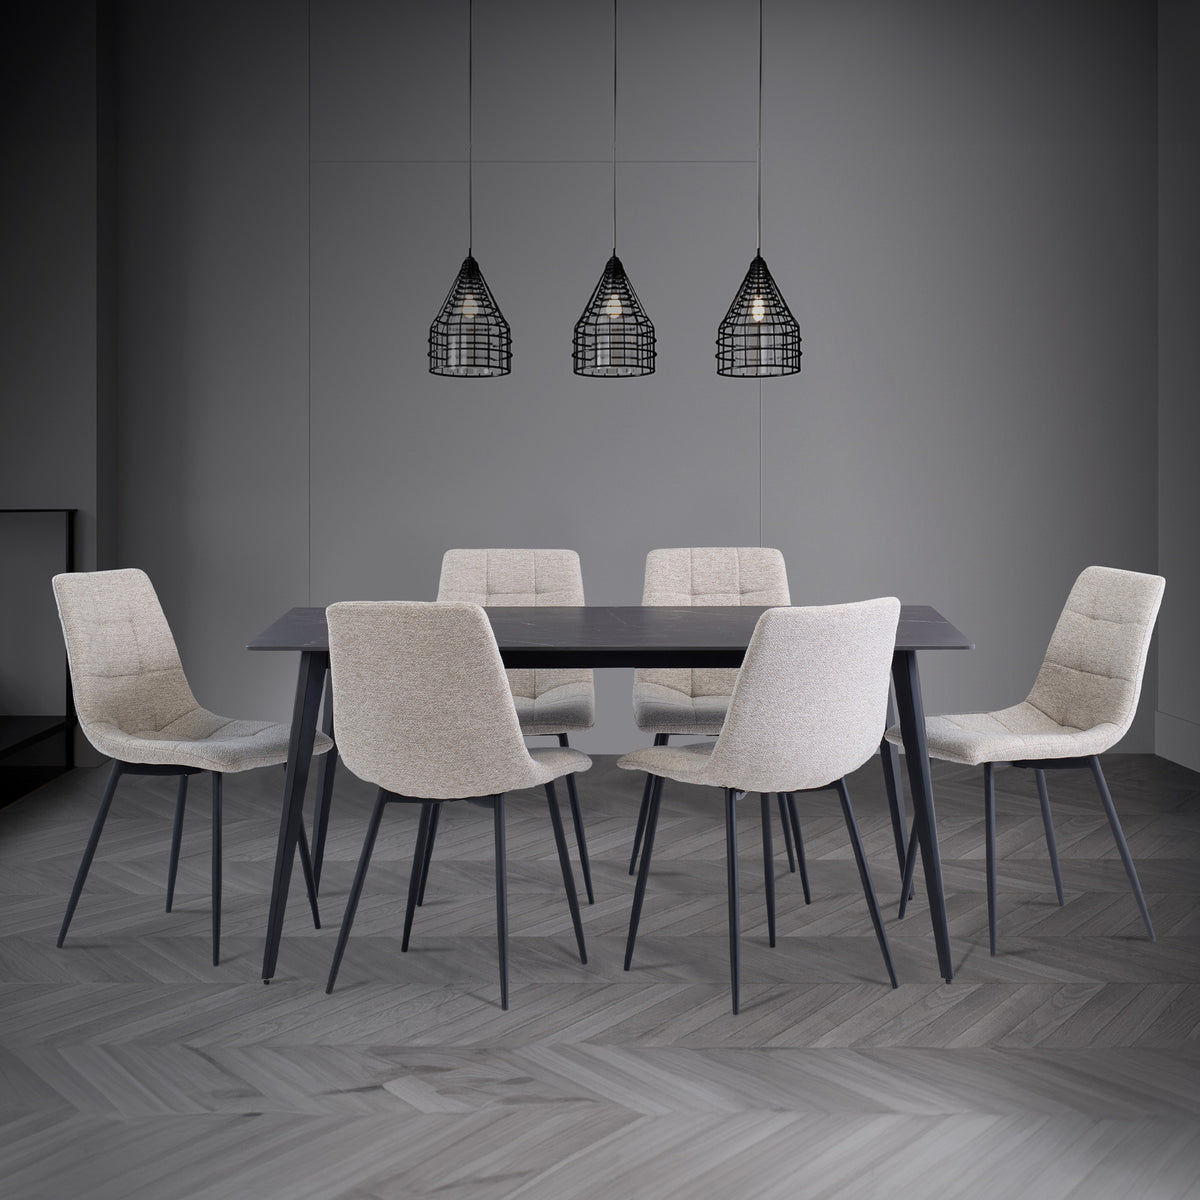 Owen Black 160cm Sintered Stone Dining Table for dining room